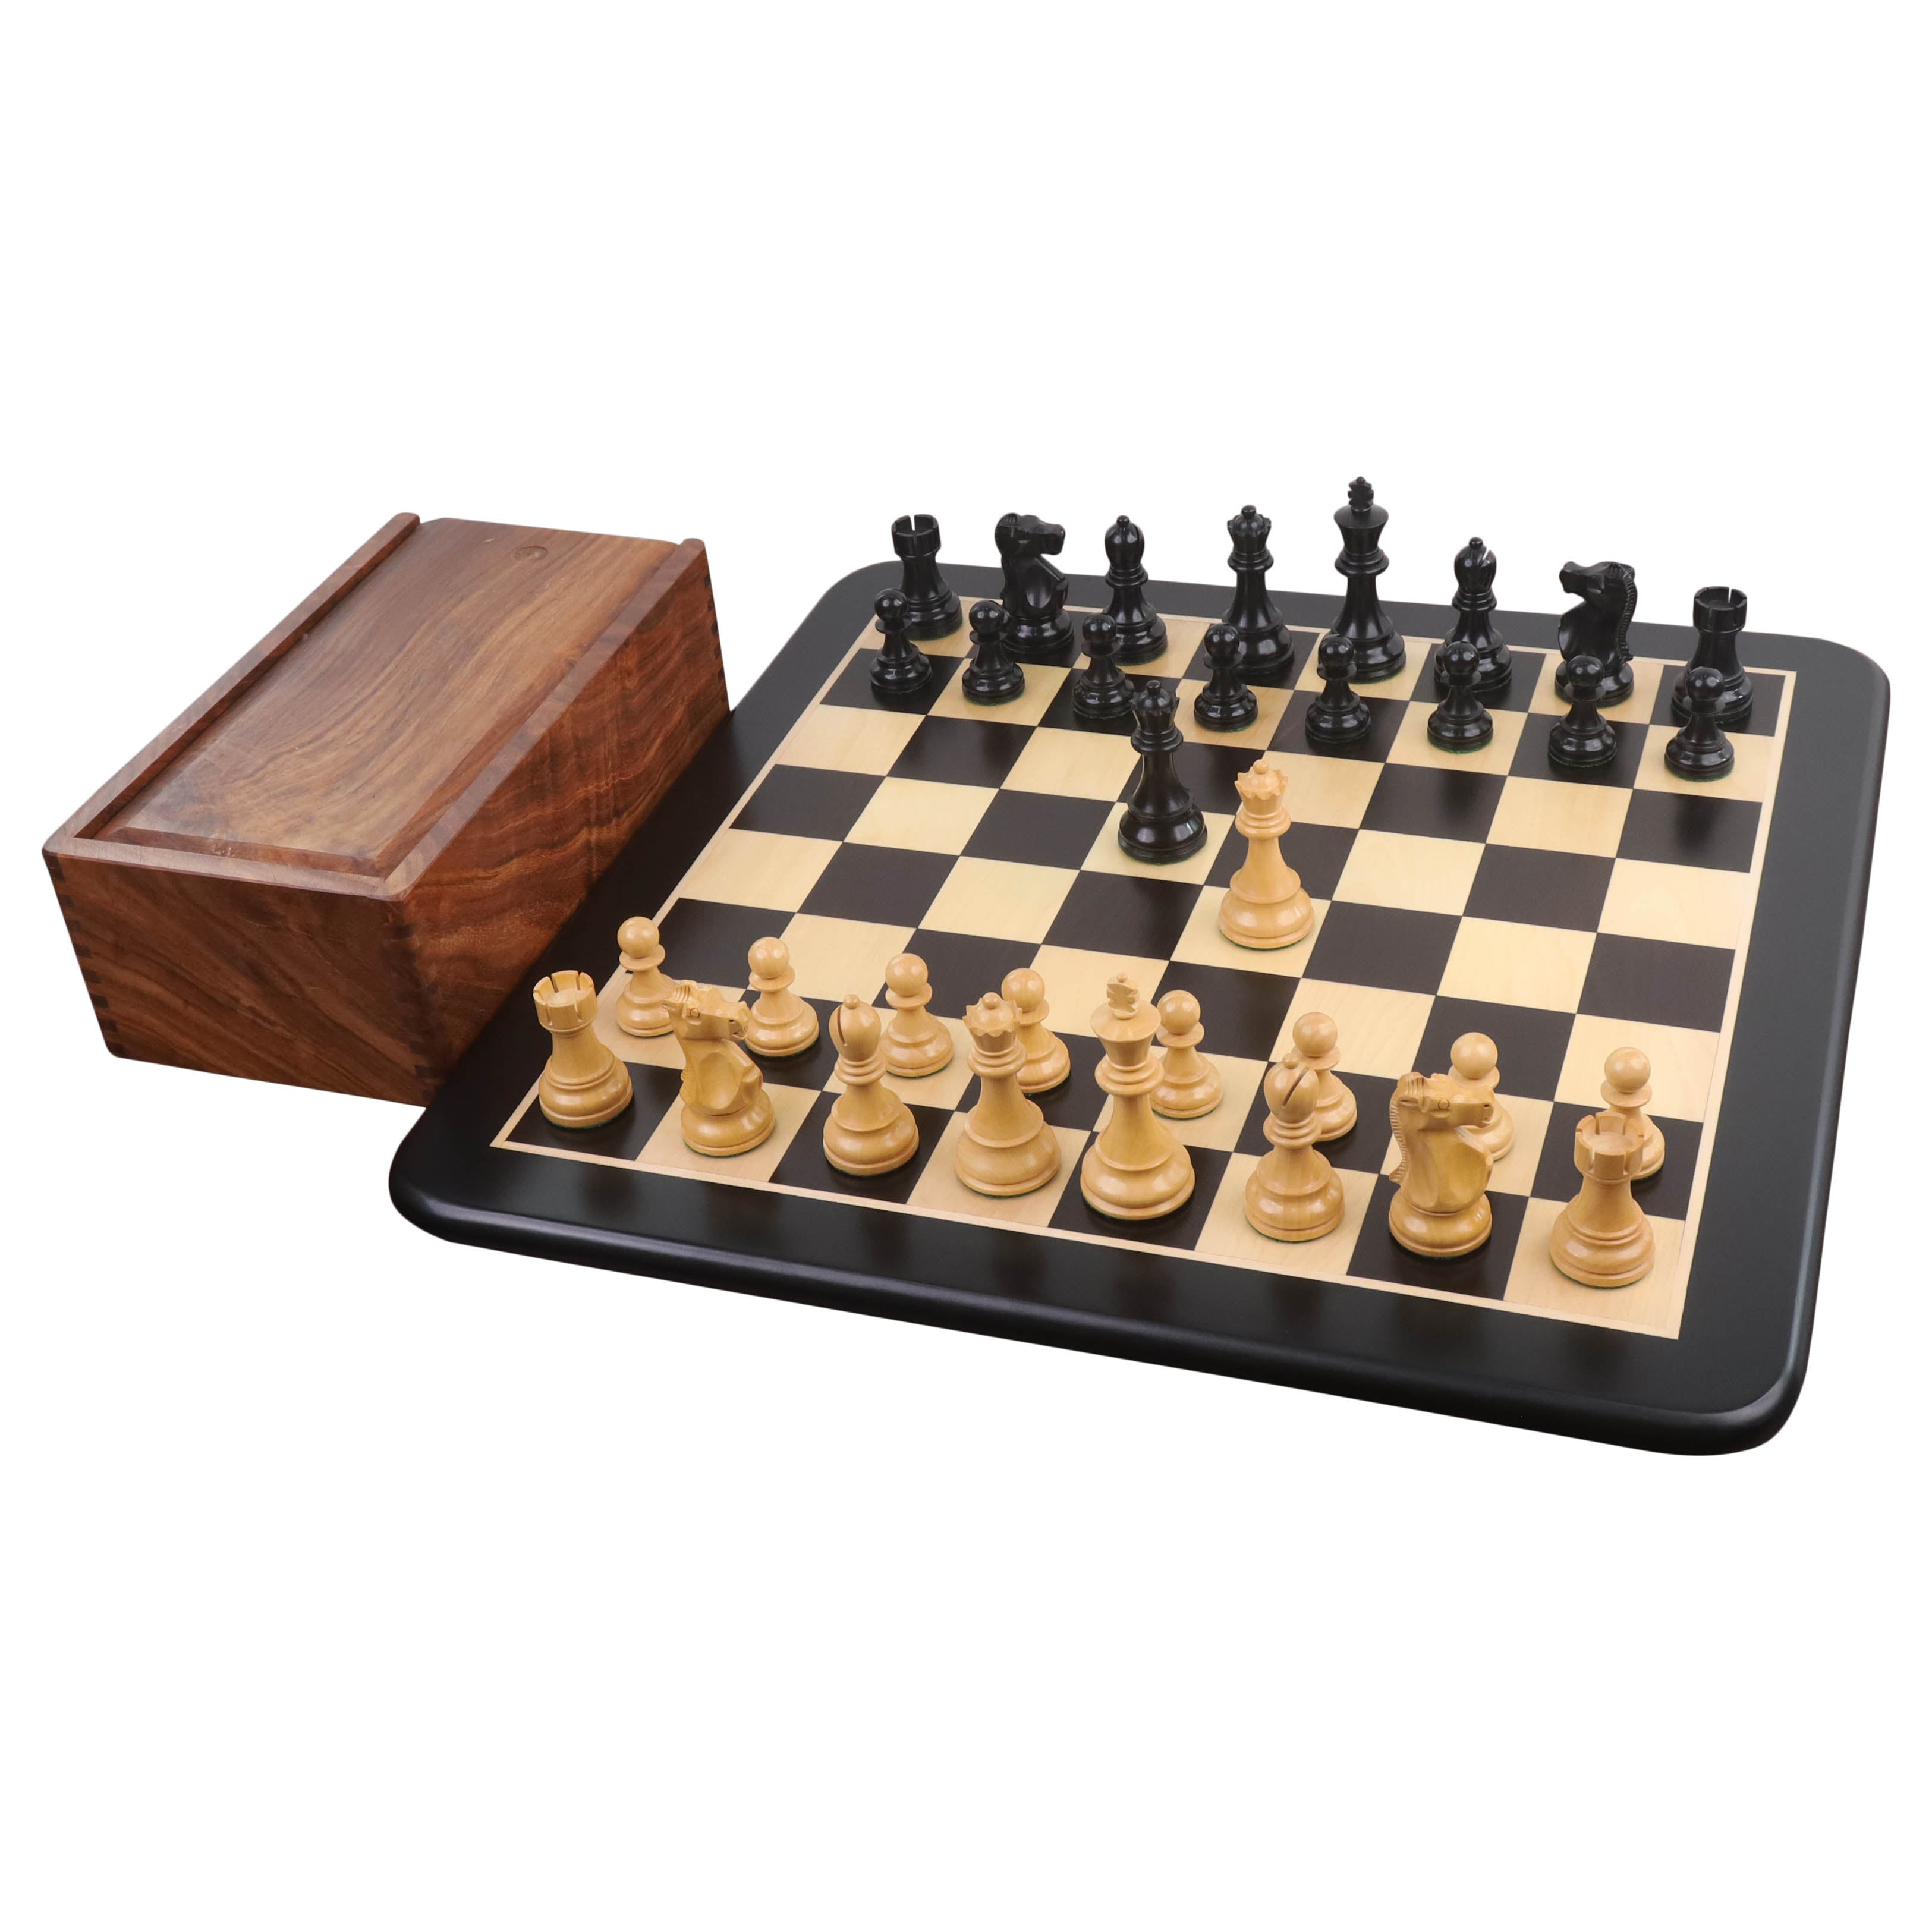 1972 Championship Fischer Spassky Chess Set- Chess Pieces Only - Double Weighted Ebony wood